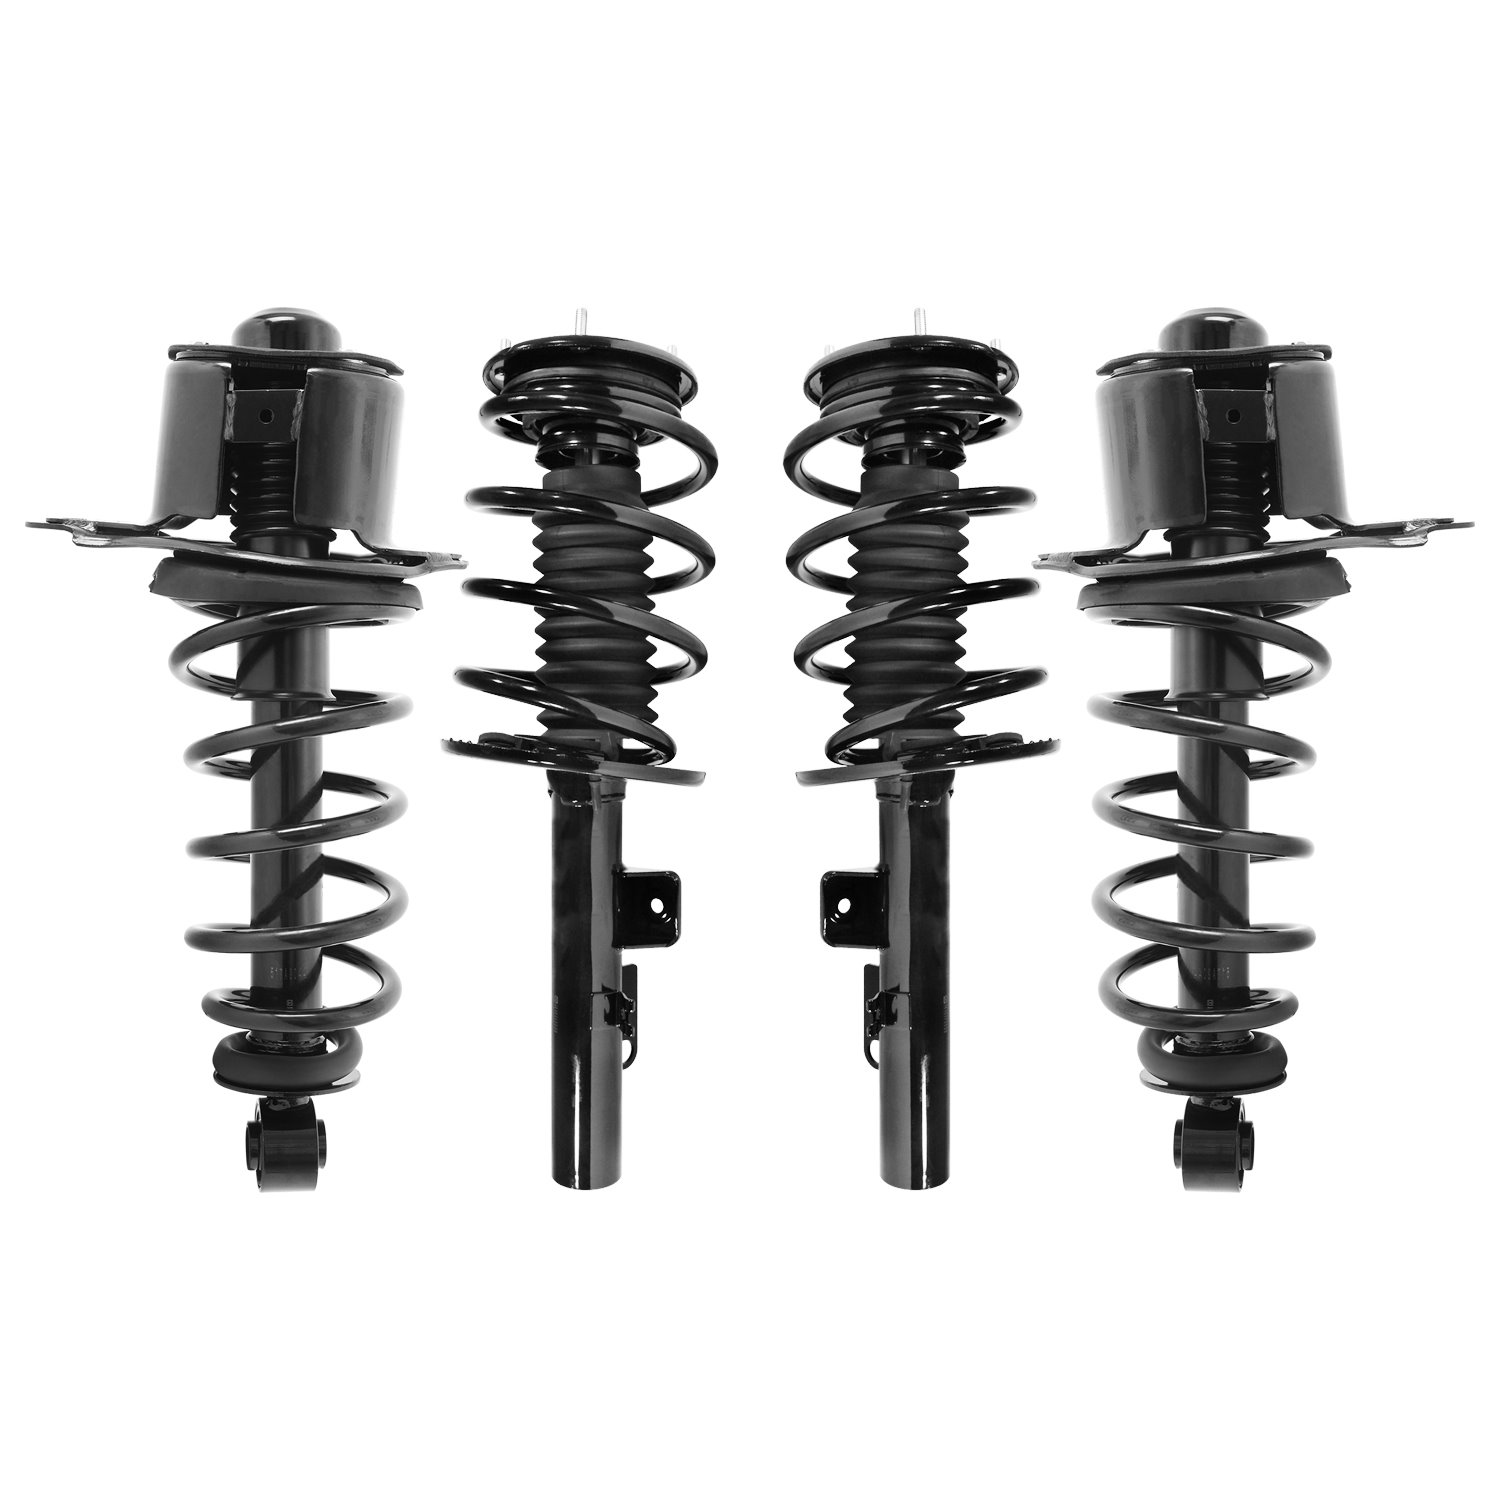 4-11543-15043-001 Front & Rear Suspension Strut & Coil Spring Assembly Kit Fits Select Ford Taurus, Mercury Sable